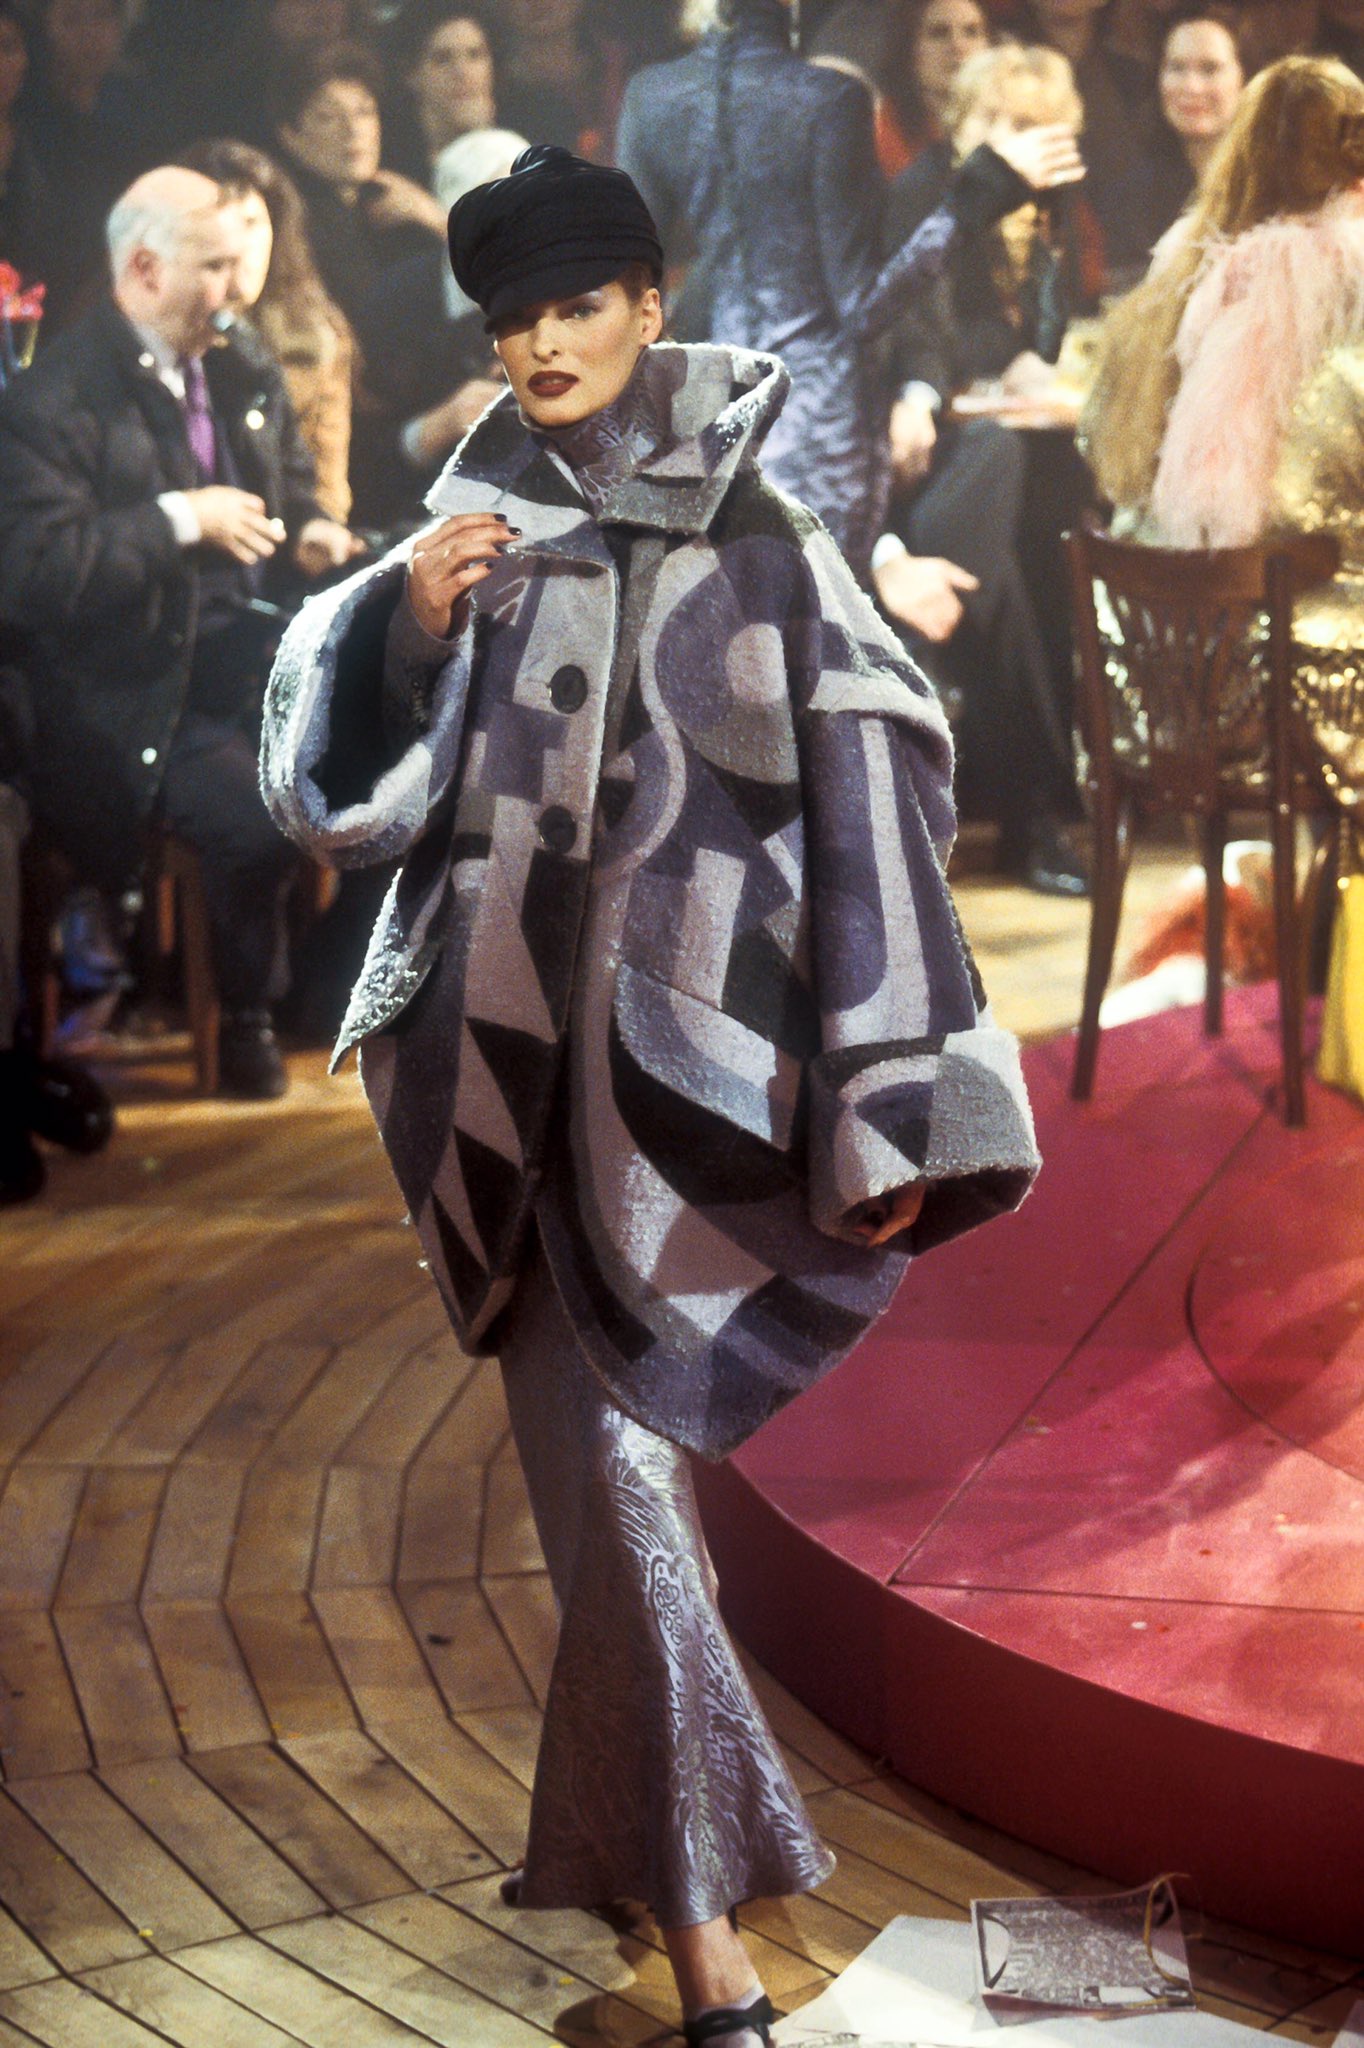 Nathan on X: john galliano s/s 1997, the circus collection https